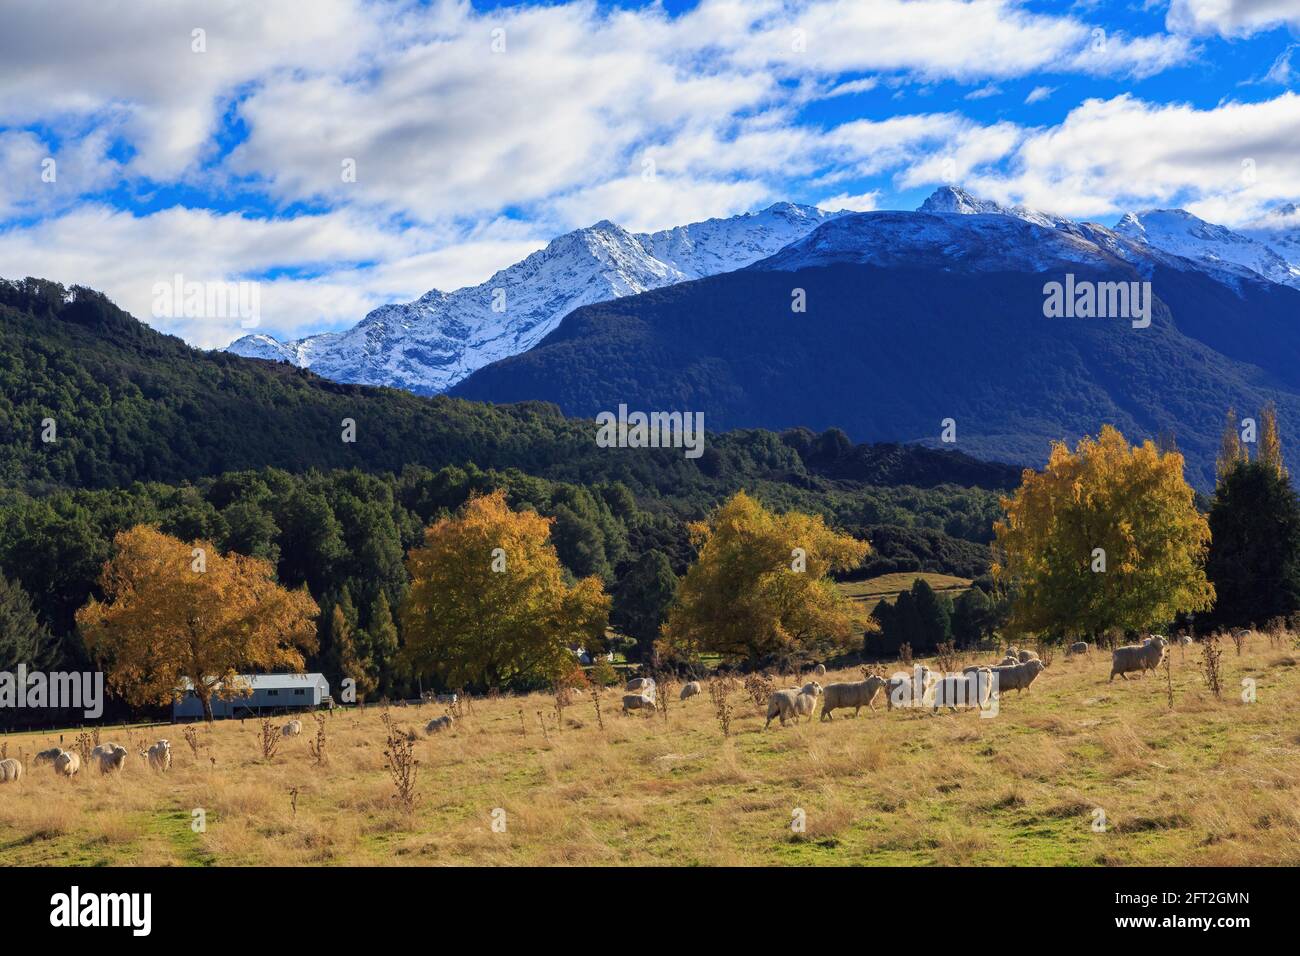 Autumn landscape at Paradise, a rural locale in the South Island of New Zealand surrounded by the mountains of the Southern Alps Stock Photo